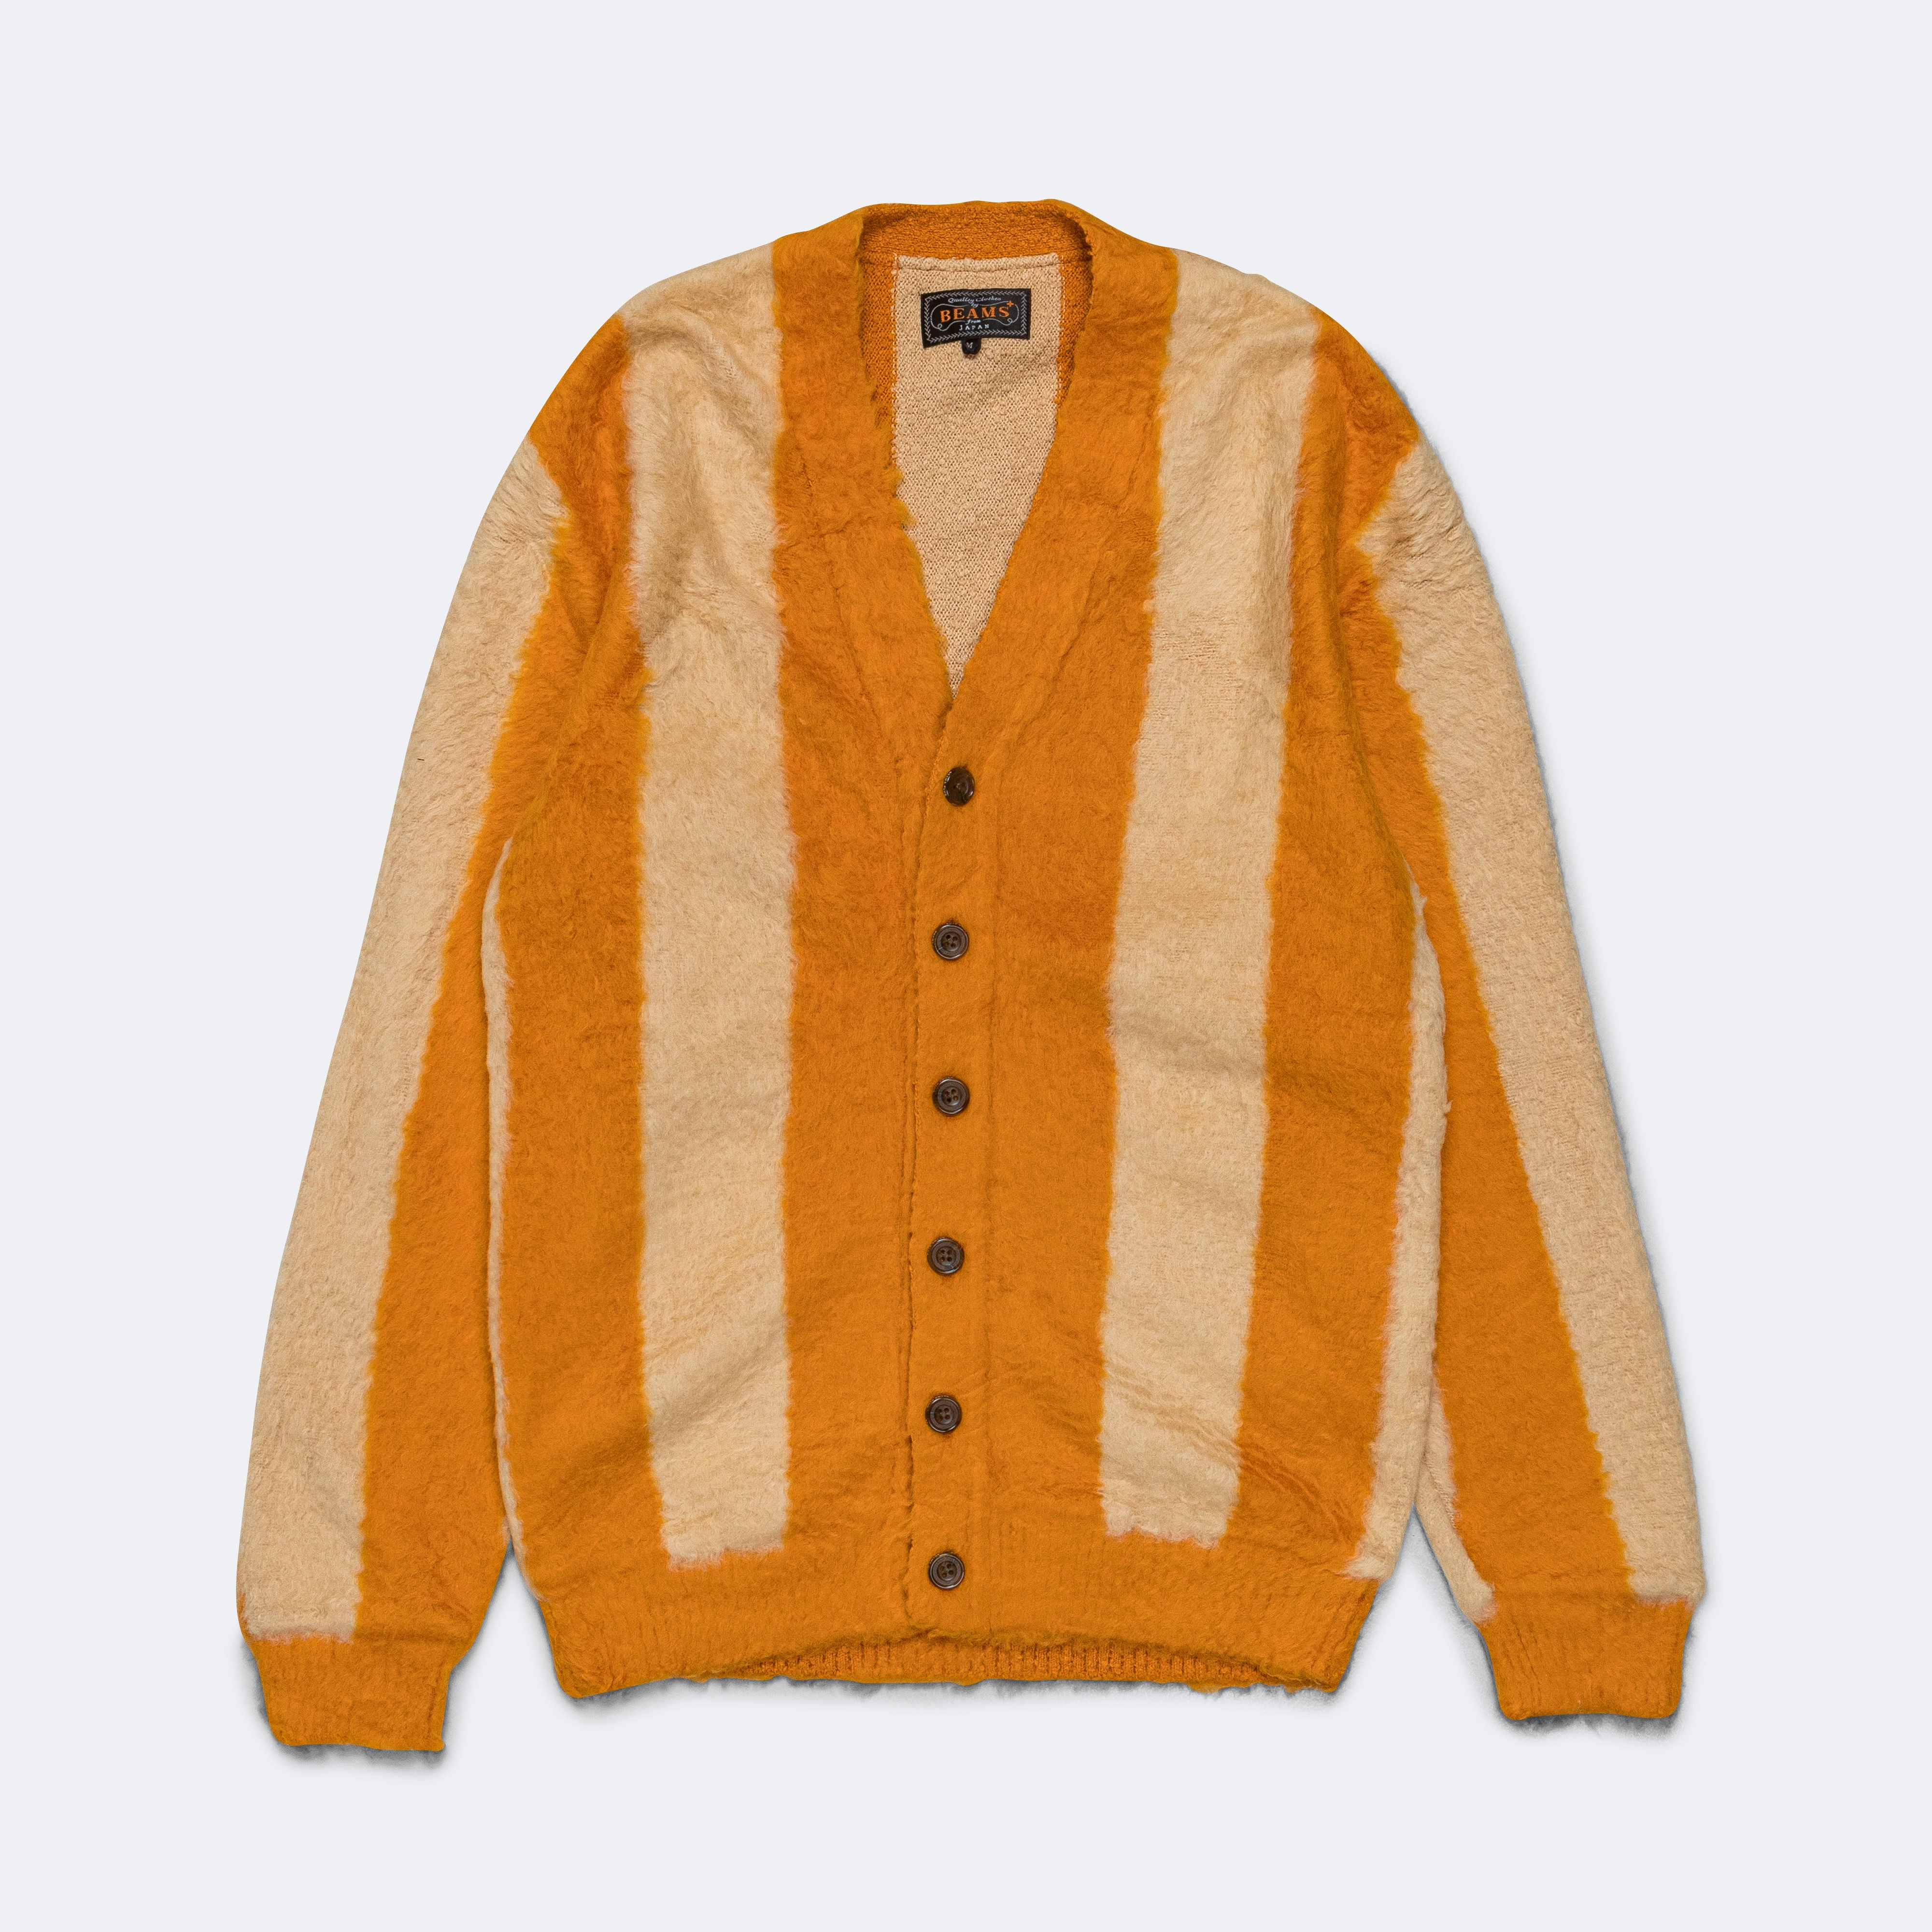 BEAMS Plus Cardigan   Mustard Stripe Shaggy Cotton   UP THERE